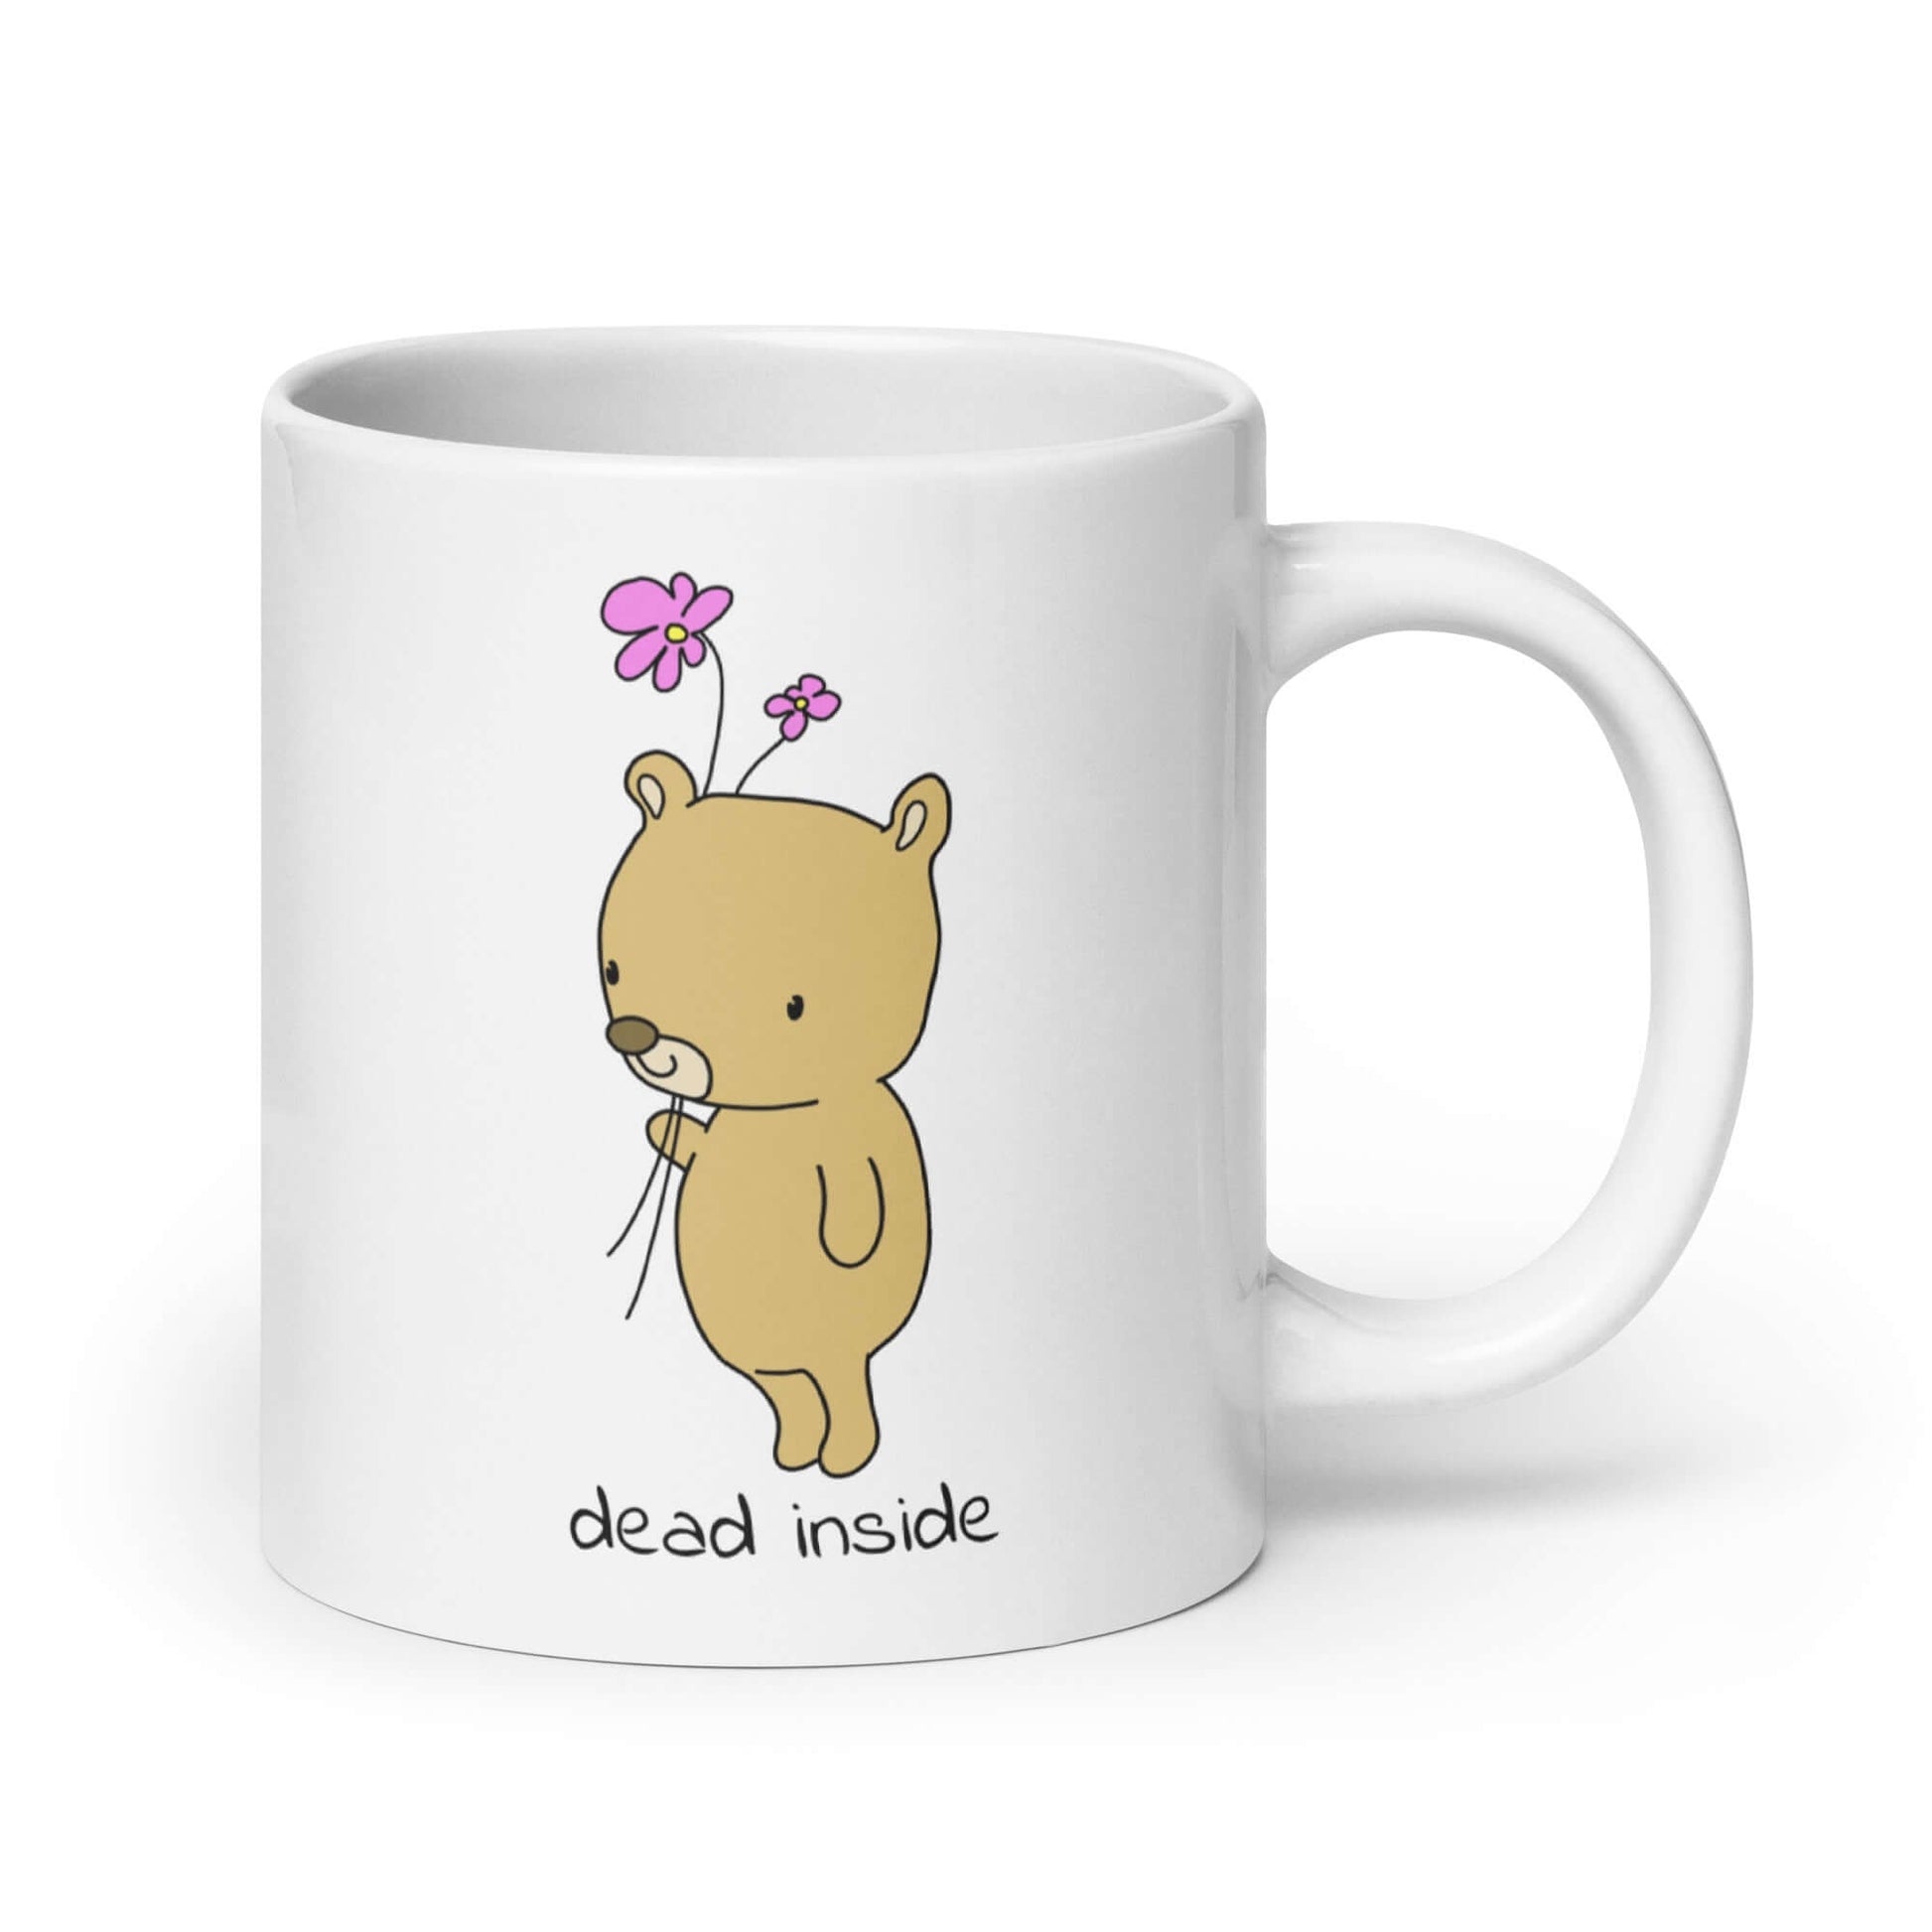 White ceramic coffee mug an image of a cute bear holding 2 pink flowers. The words Dead inside are printed underneath the bear. The graphics are printed on both sides of the mug.